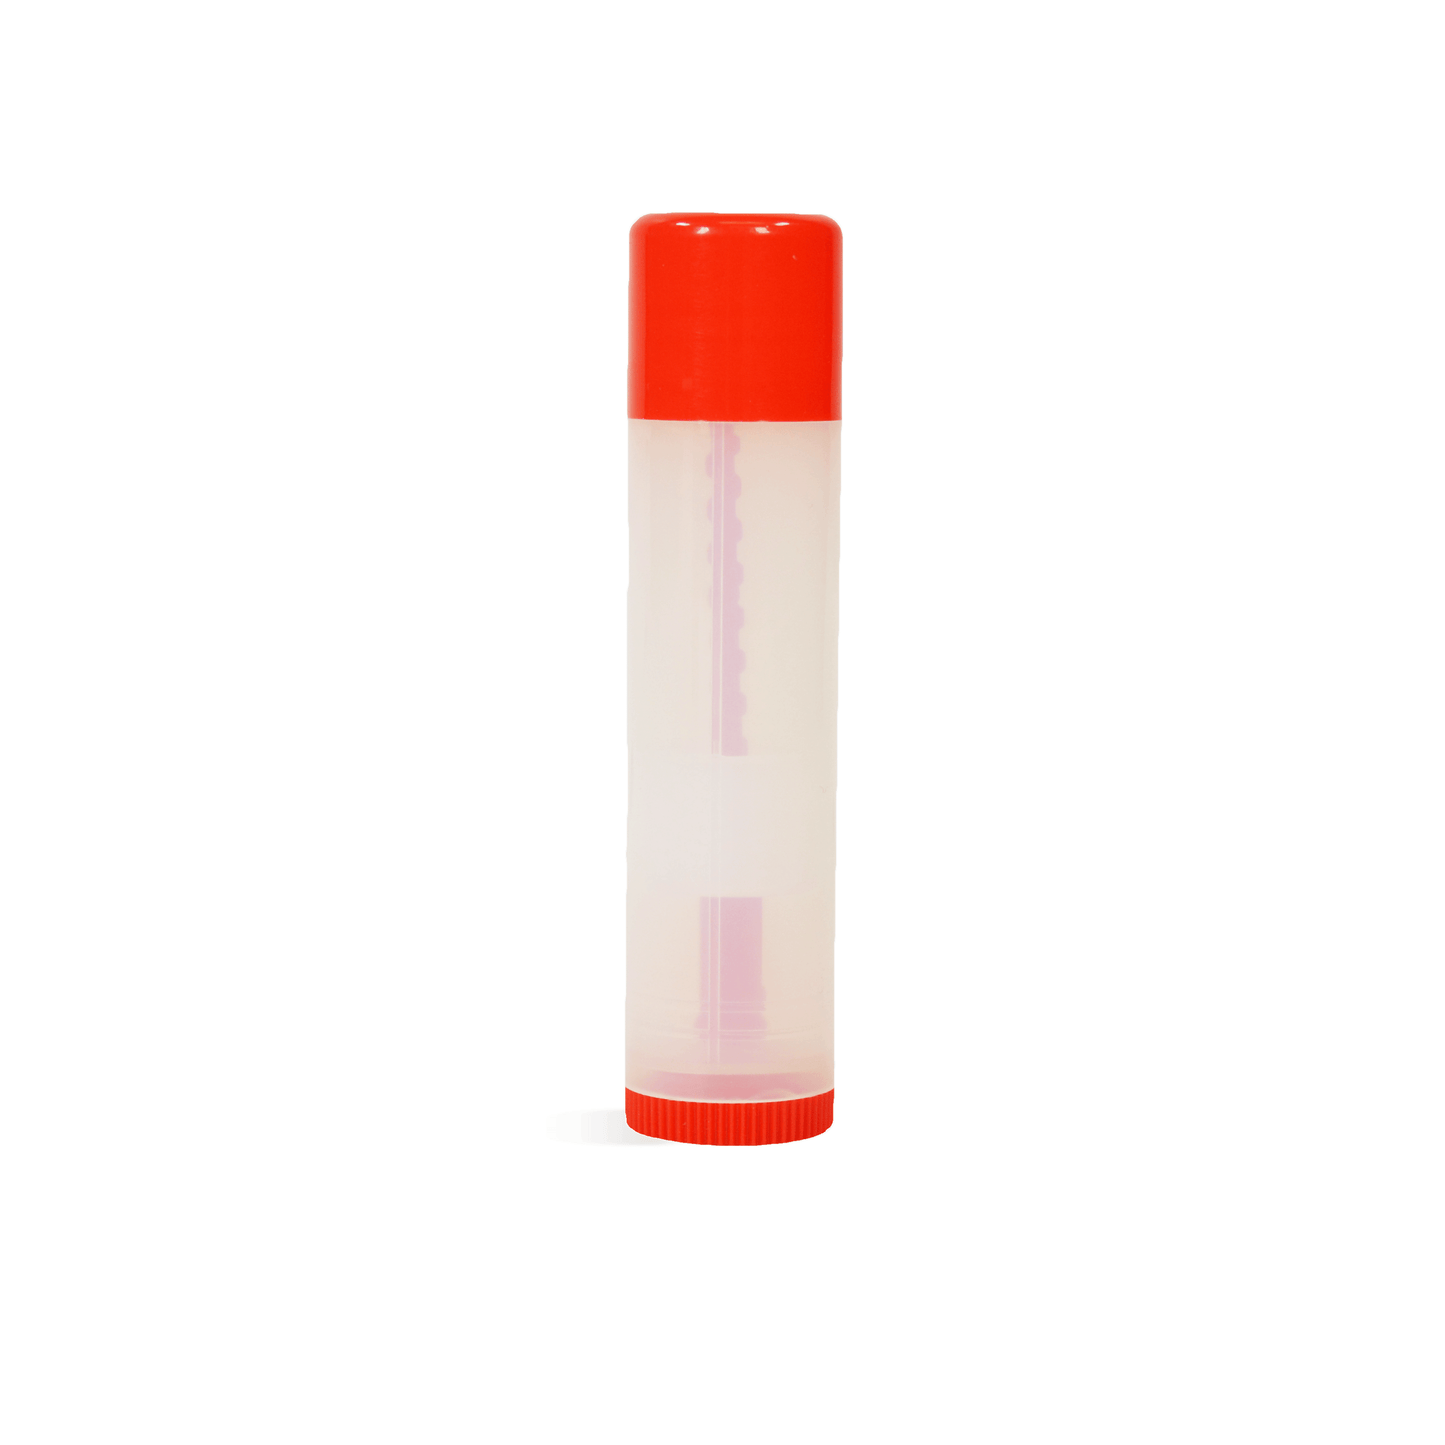 Round Lip Balm Tube with Red Cap & Dial